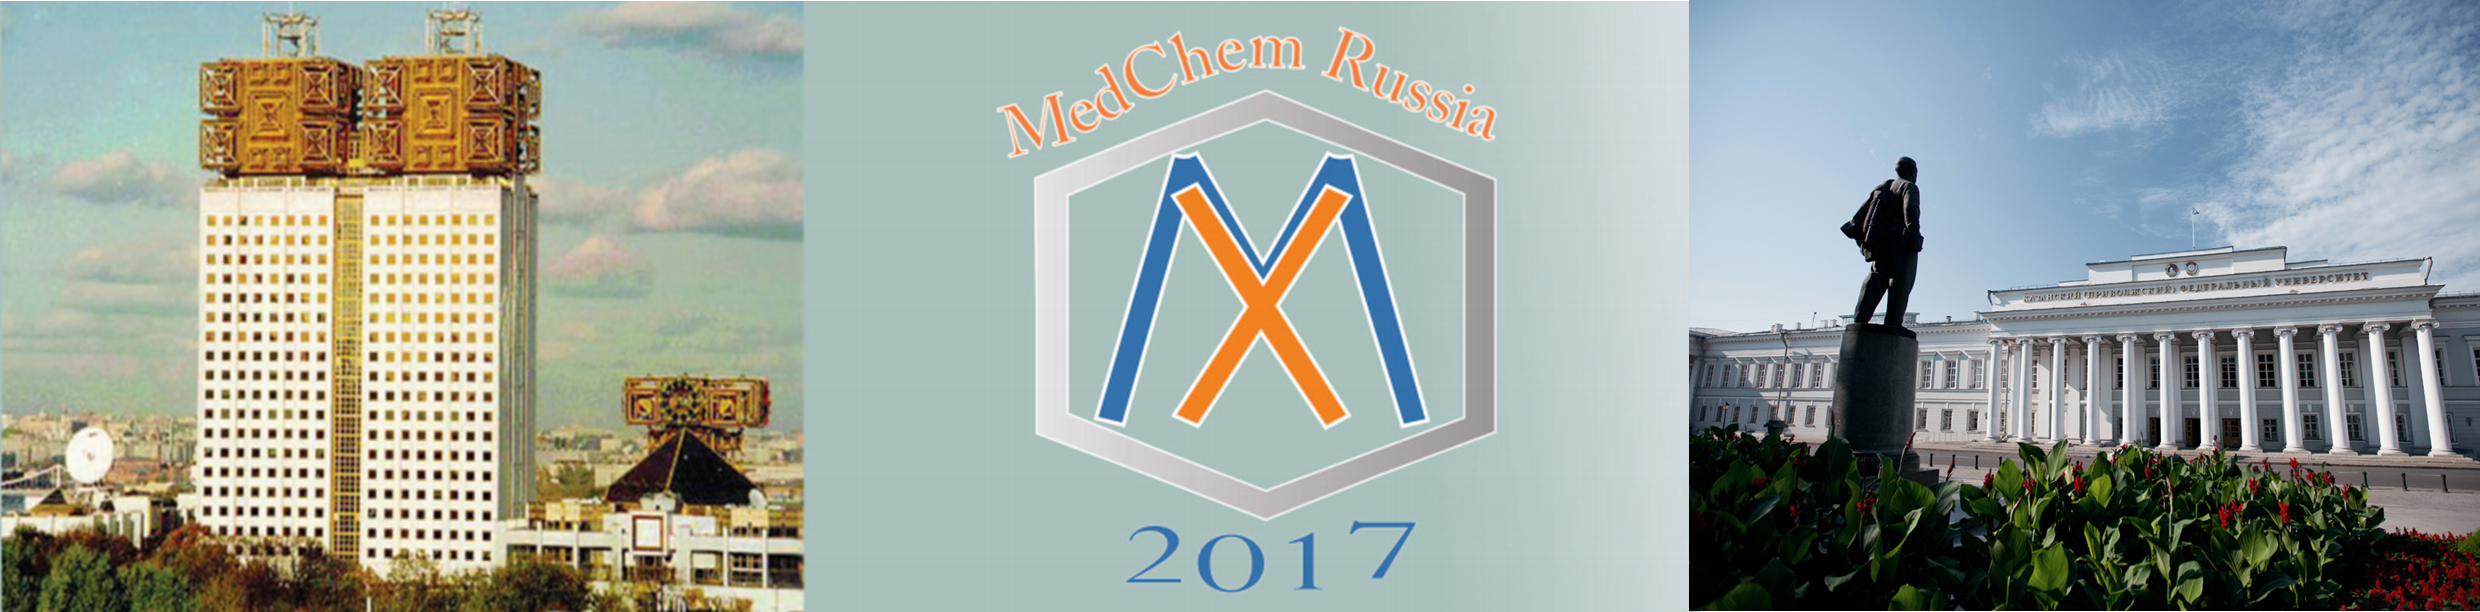   \   \   \ -   \  \ 3rd Russian Conference on Medicinal Chemistry \ Scientific Program